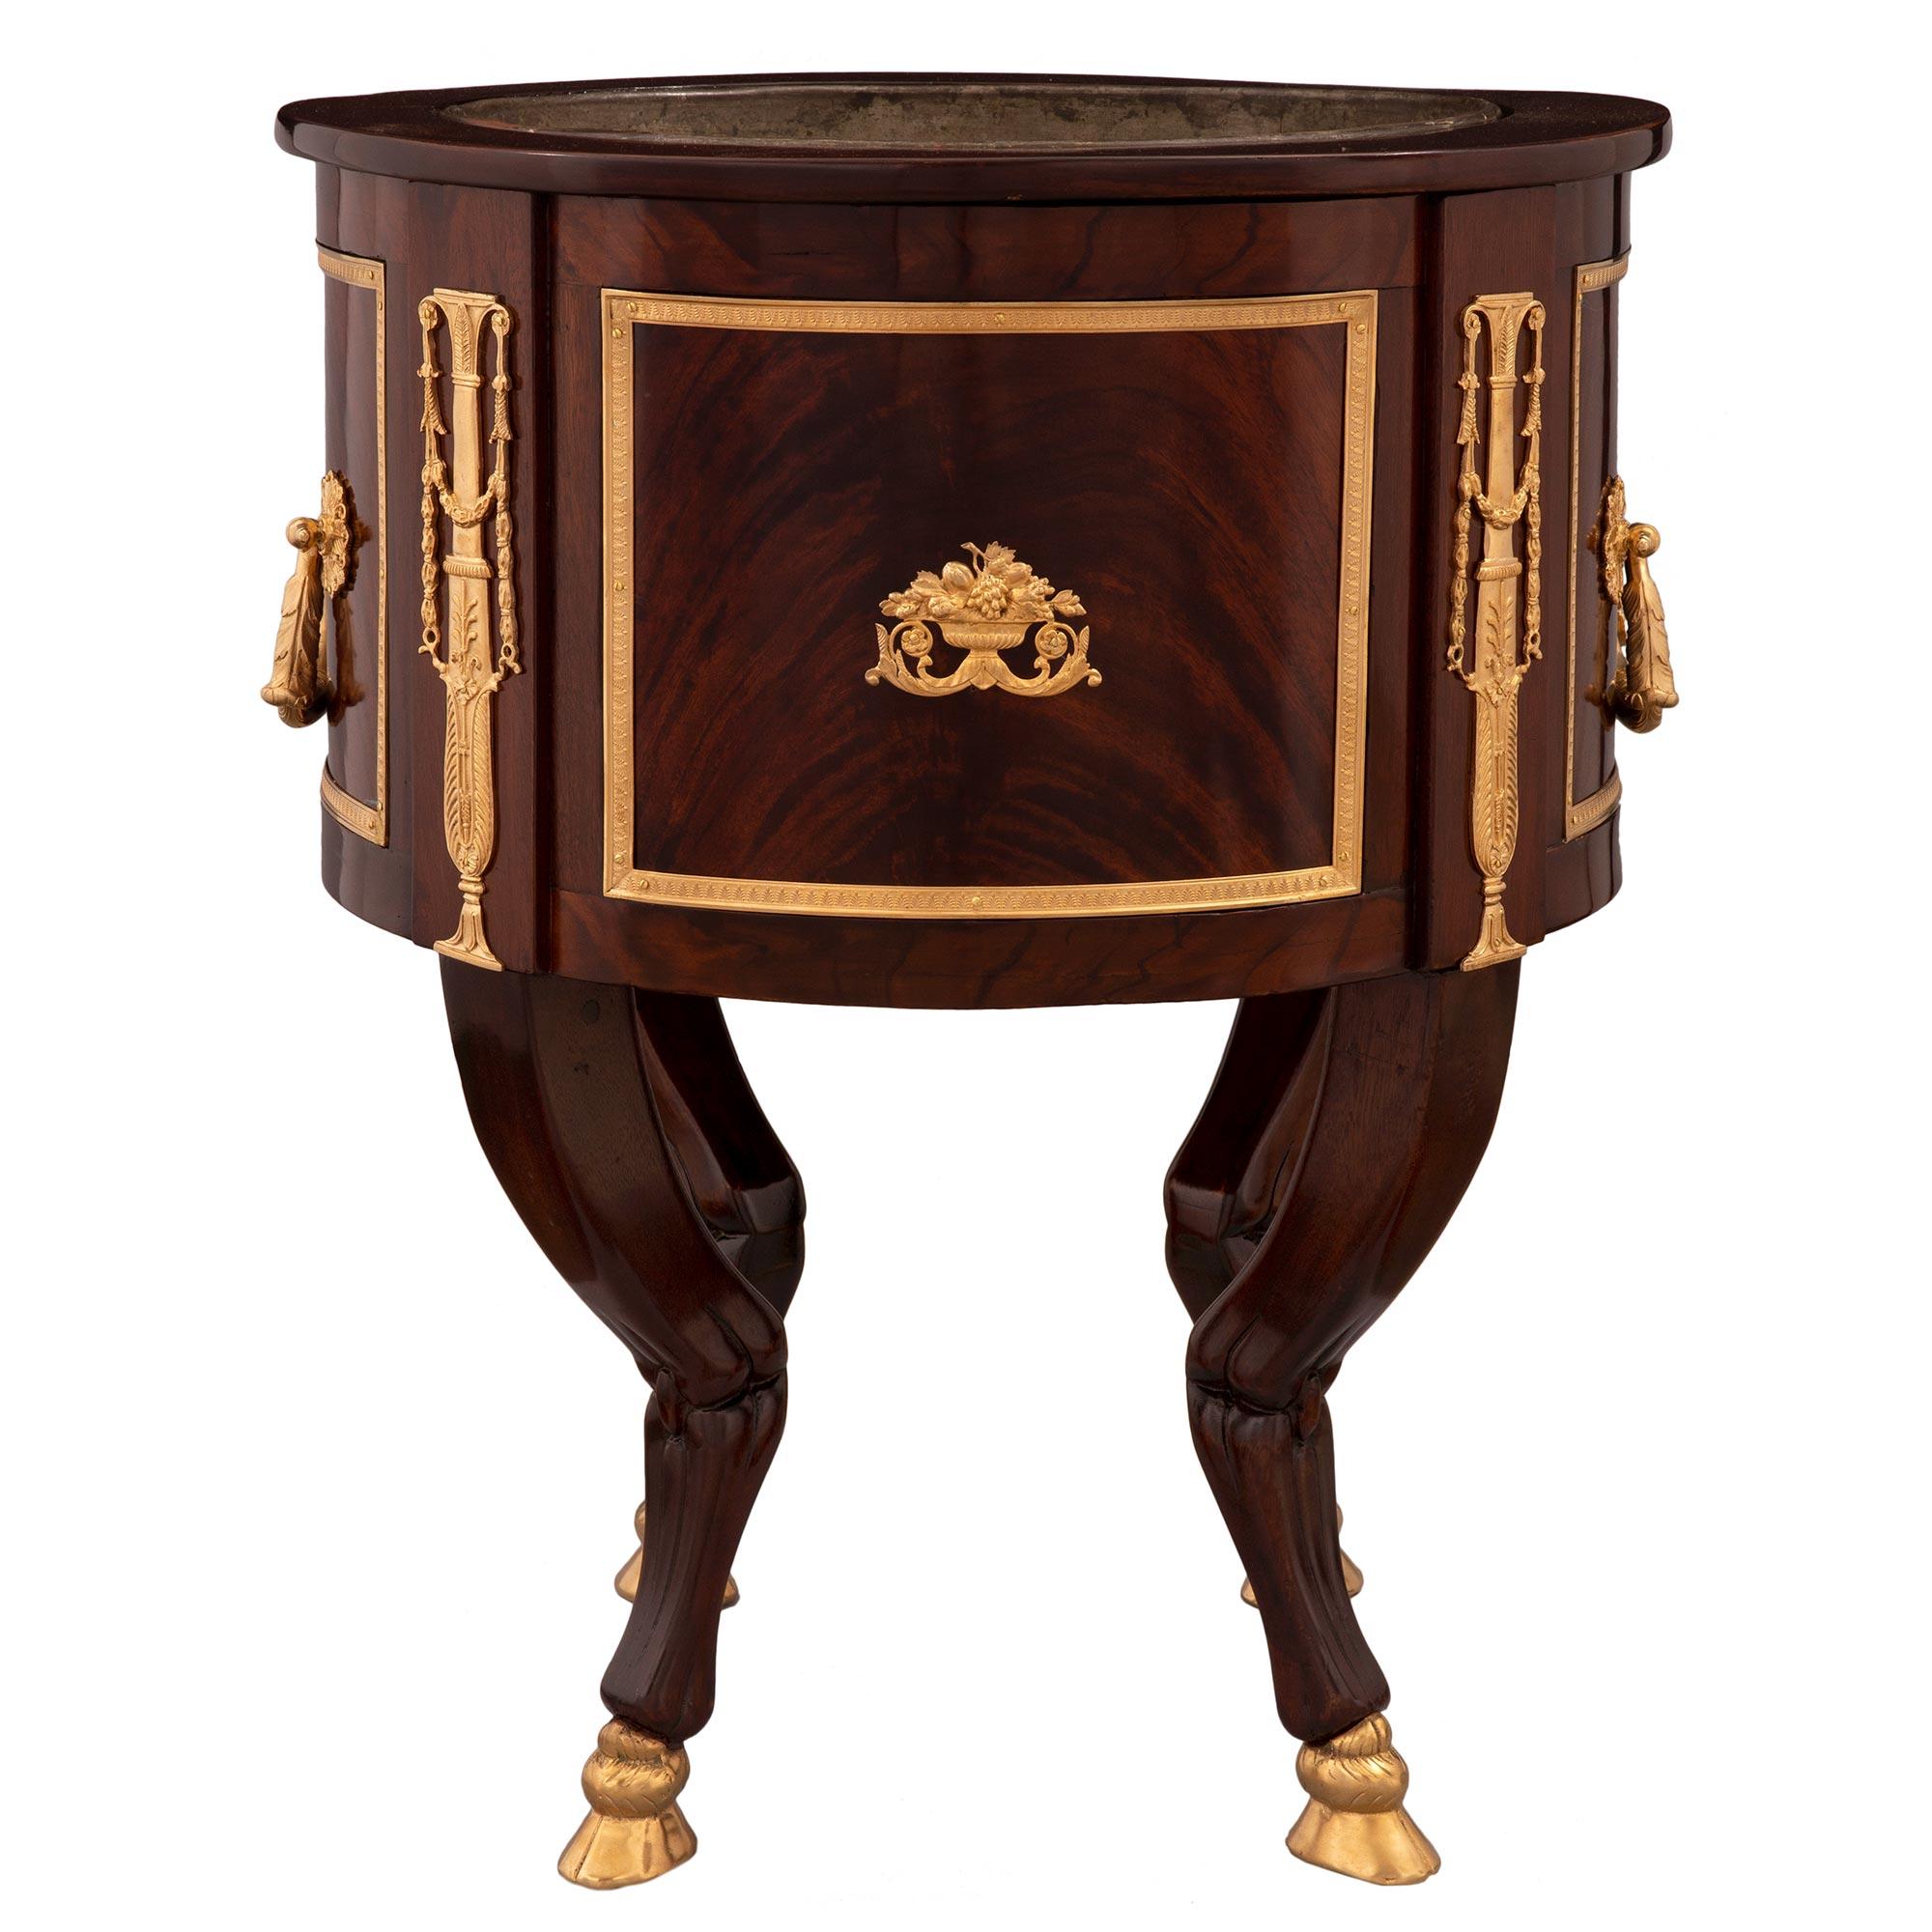 French 19th Century Neoclassical Style Mahogany and Ormolu Jardinière Planter In Good Condition For Sale In West Palm Beach, FL